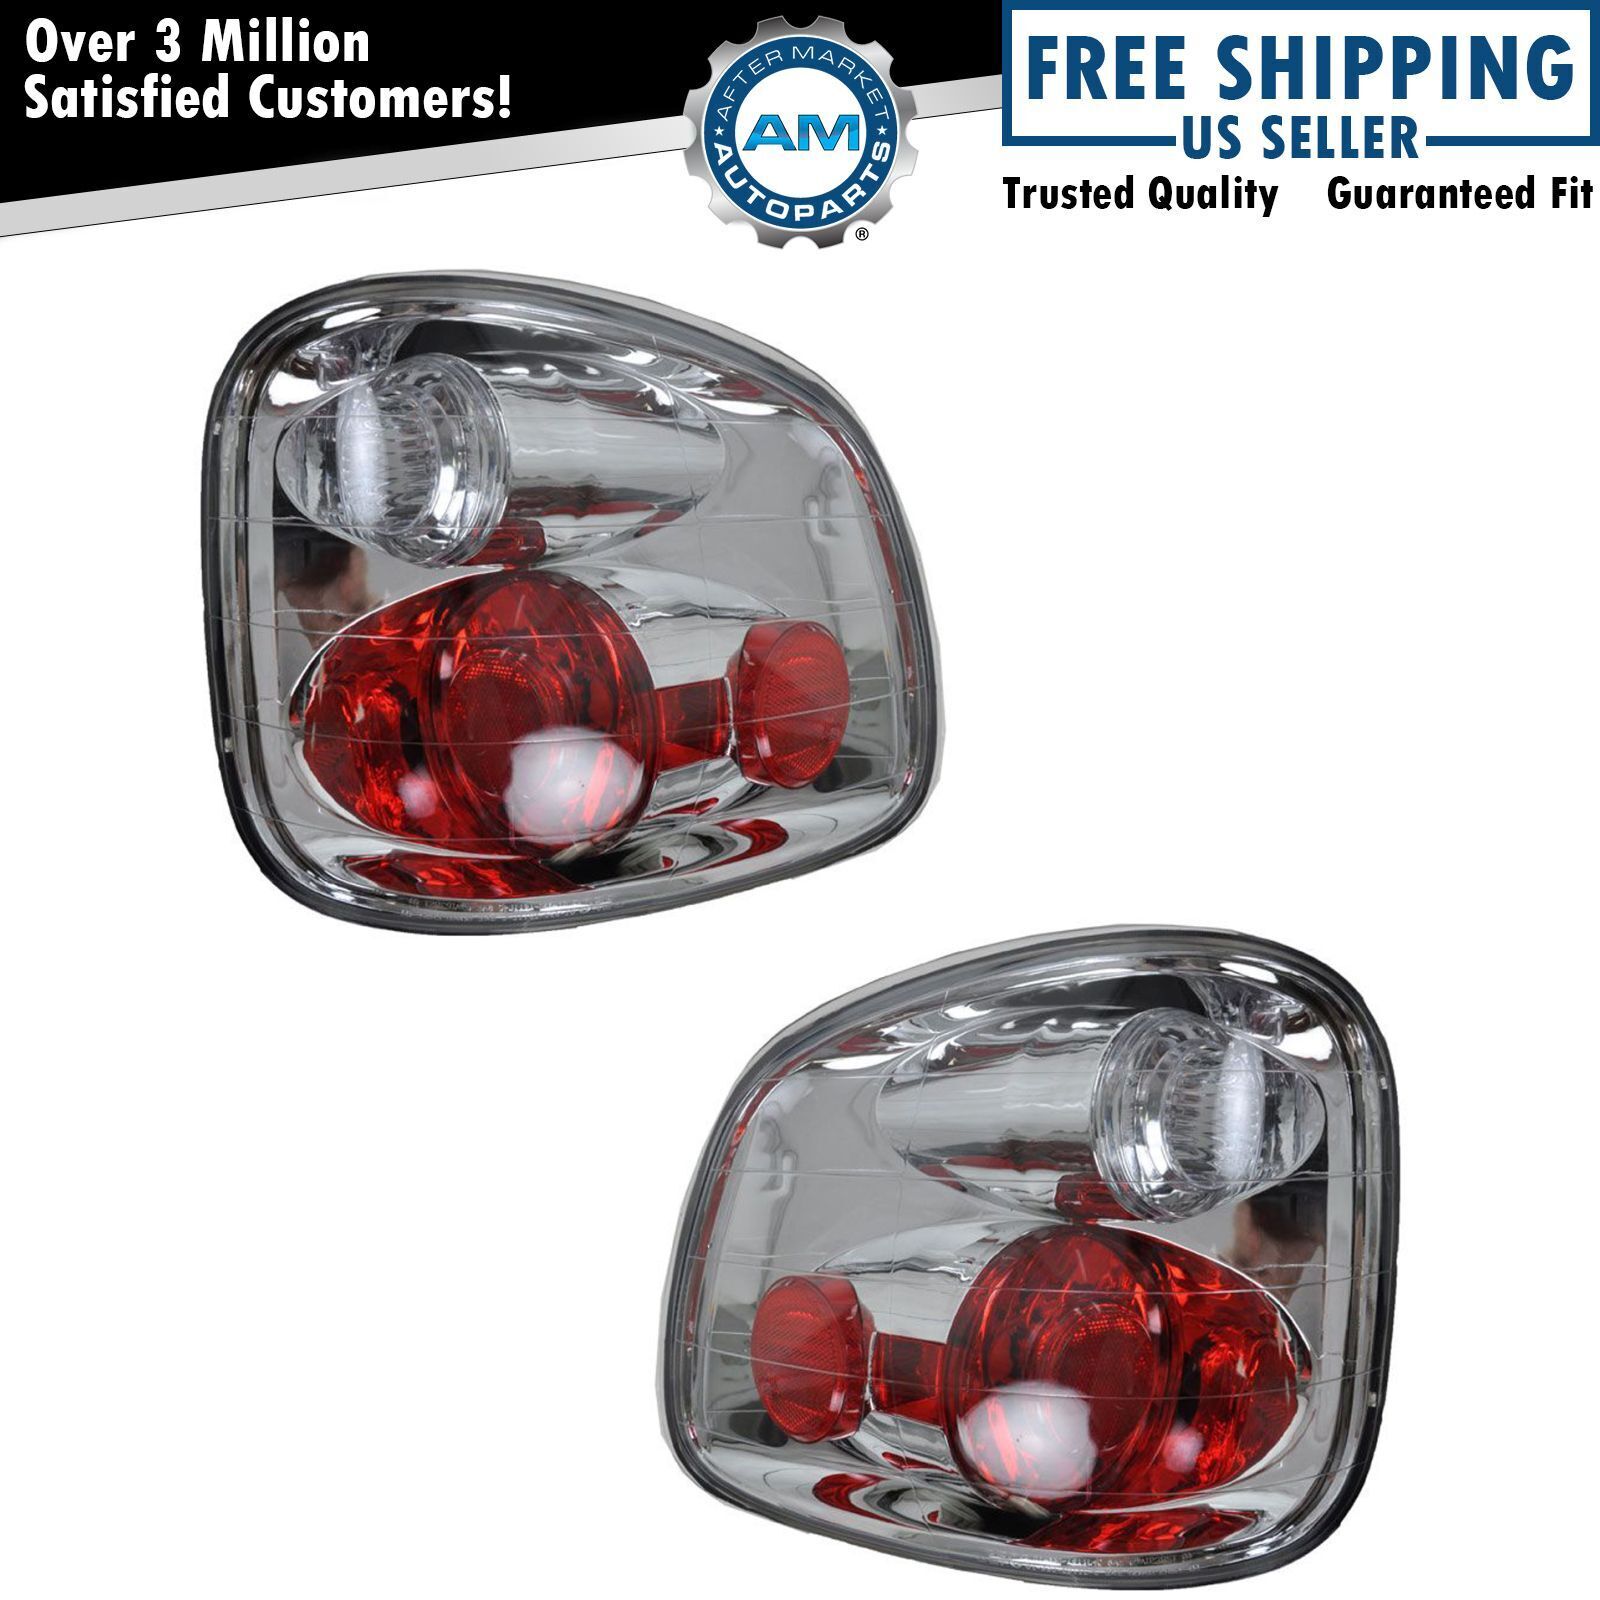 Taillights Taillamps Left & Right Pair Set for 01-04 F150 Lightning Pickup Truck